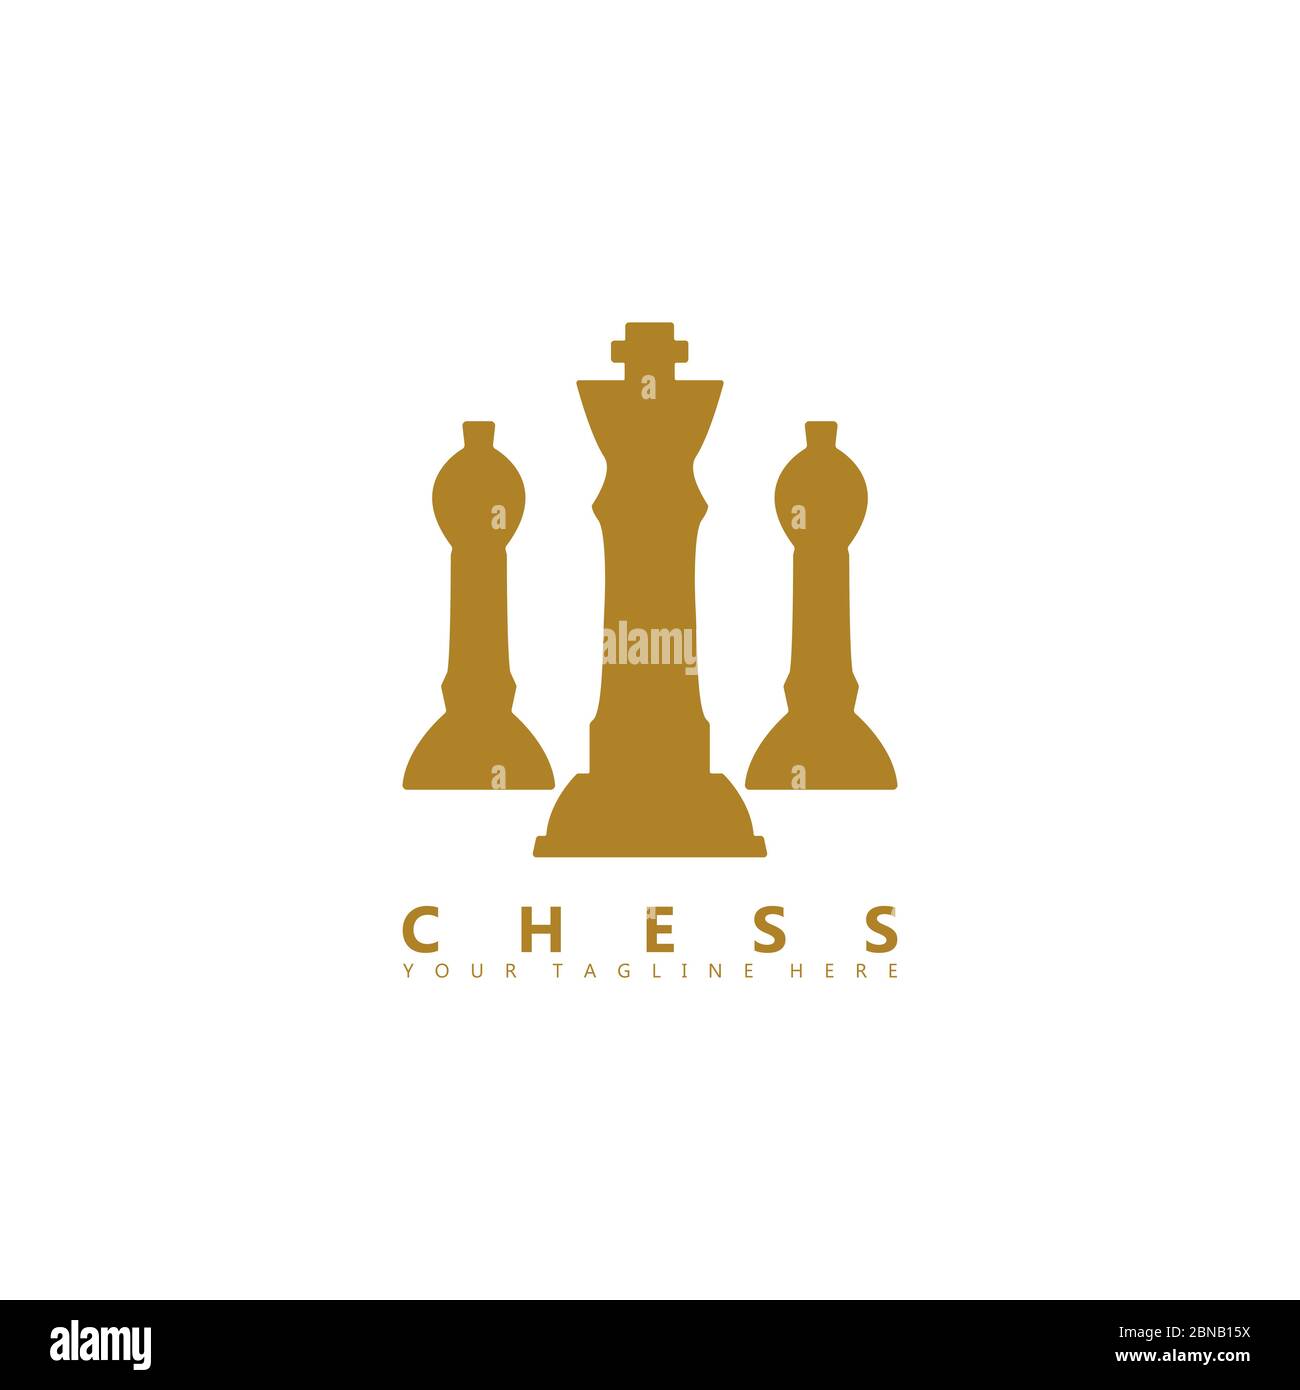 Chess Pieces Set Stock Illustration - Download Image Now - Logo, Chess,  Bishop - Chess Piece - iStock